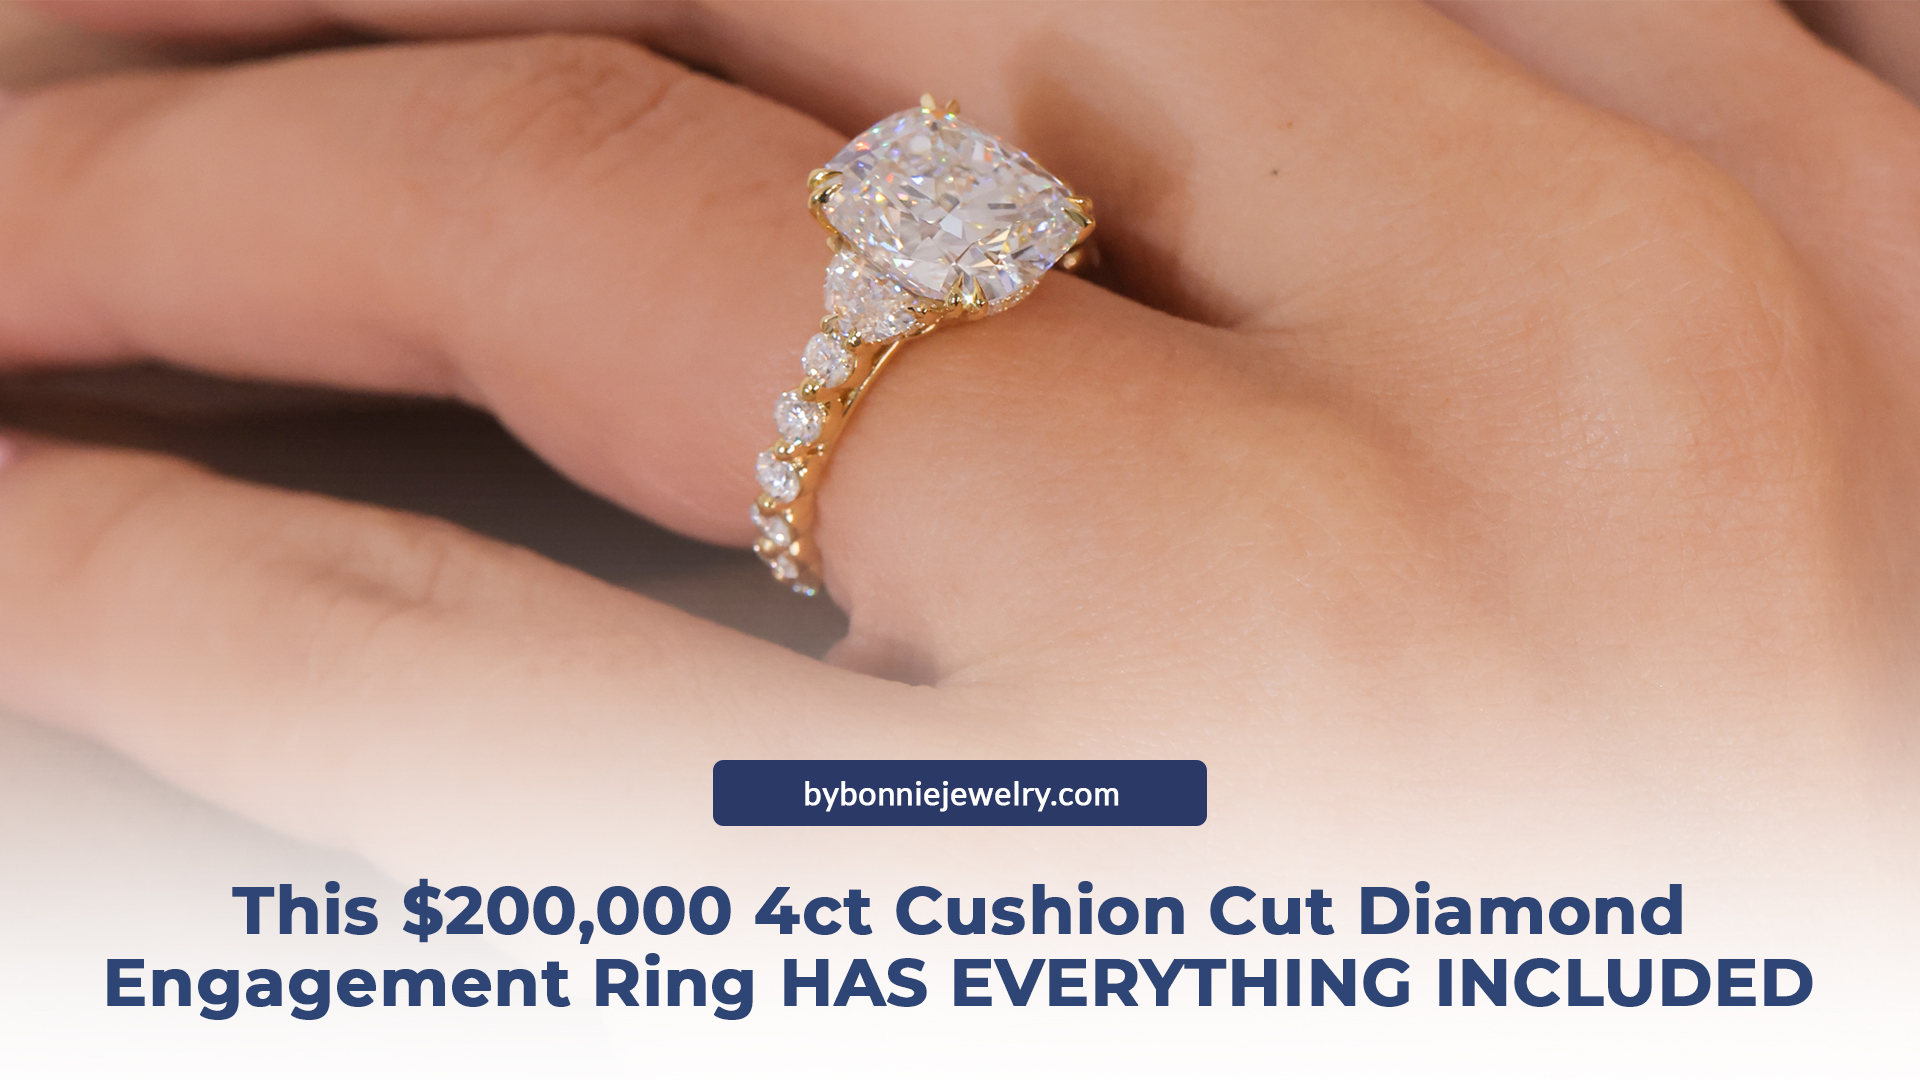 The Natural Diamond Engagement Rings on Everyone's Wish List